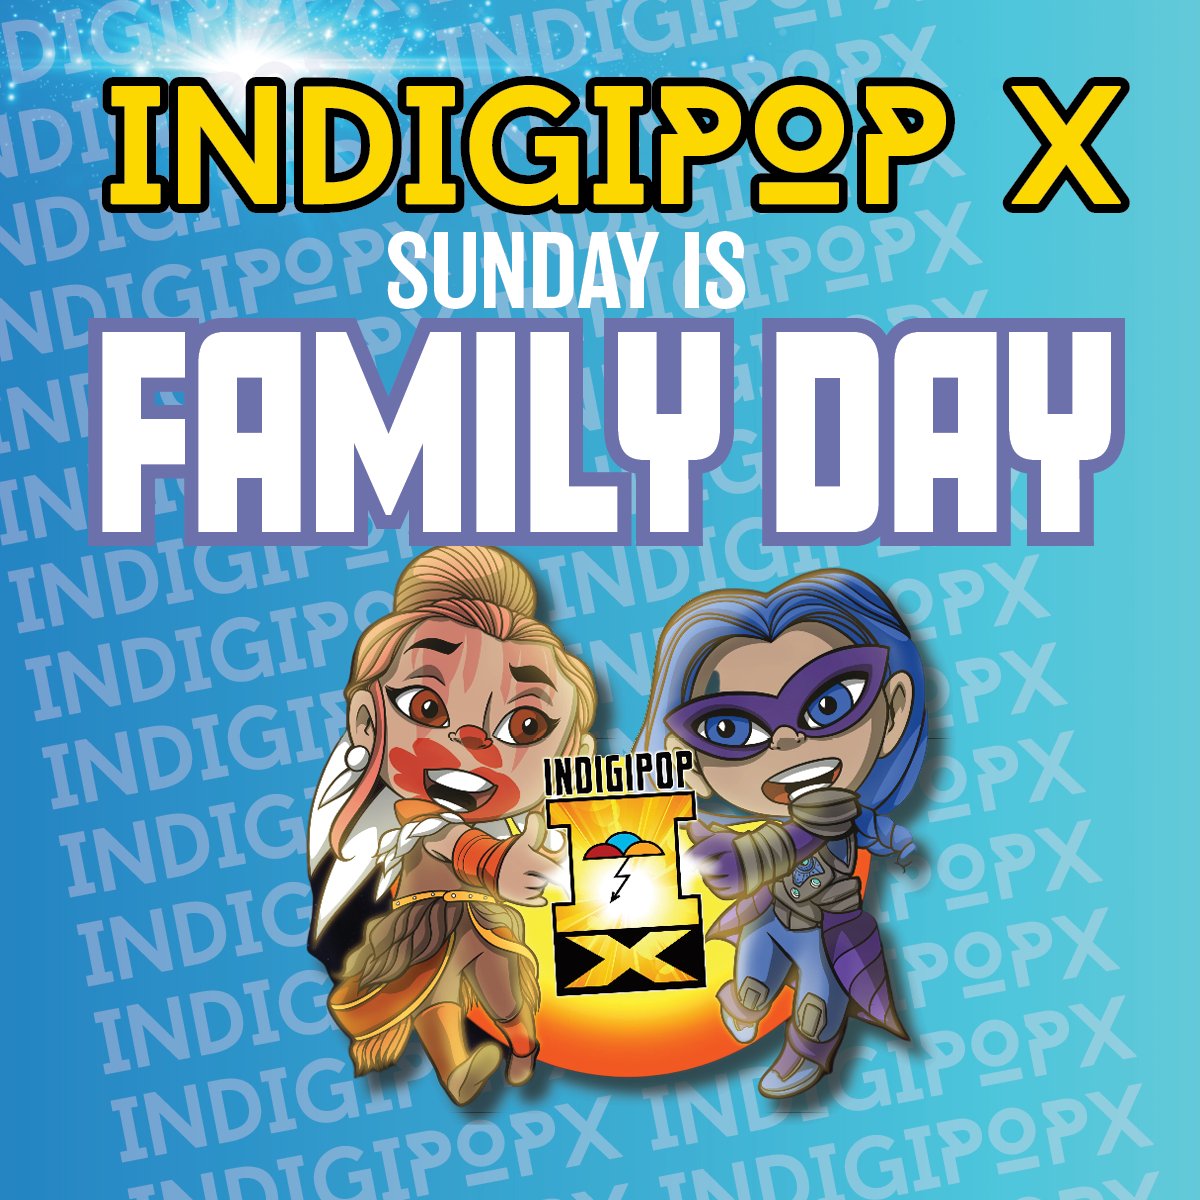 Sunday is FAMILY DAY at #INDIGPOPX! COSPLAY CONTEST & PARADE at 1 pm! Highlights: Big Huncle Energy ⭐️ Strawberry Shortcake ⭐️ Inchunwa podcast⭐️ More! Program ➡️ indigenouscomiccon.com/programming-de… 📍 @FAMokMuseum 🎟️ indigipopx.com (tix + info) #Indiginerds #EveryoneWelcome